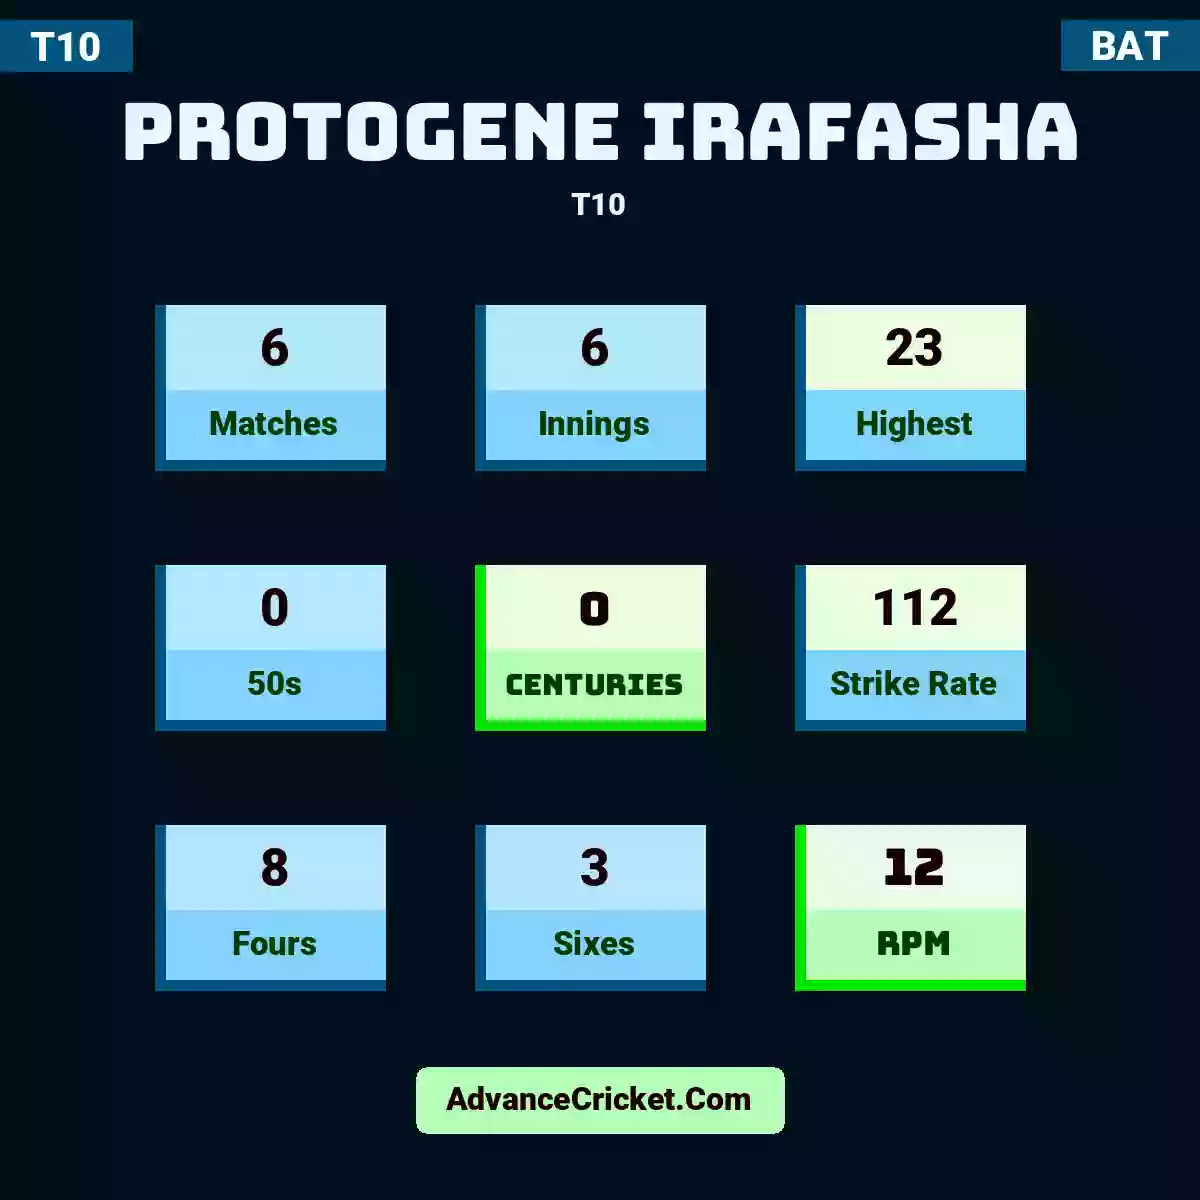 Protogene Irafasha T10 , Protogene Irafasha played 6 matches, scored 23 runs as highest, 0 half-centuries, and 0 centuries, with a strike rate of 112. P.Irafasha hit 8 fours and 3 sixes, with an RPM of 12.